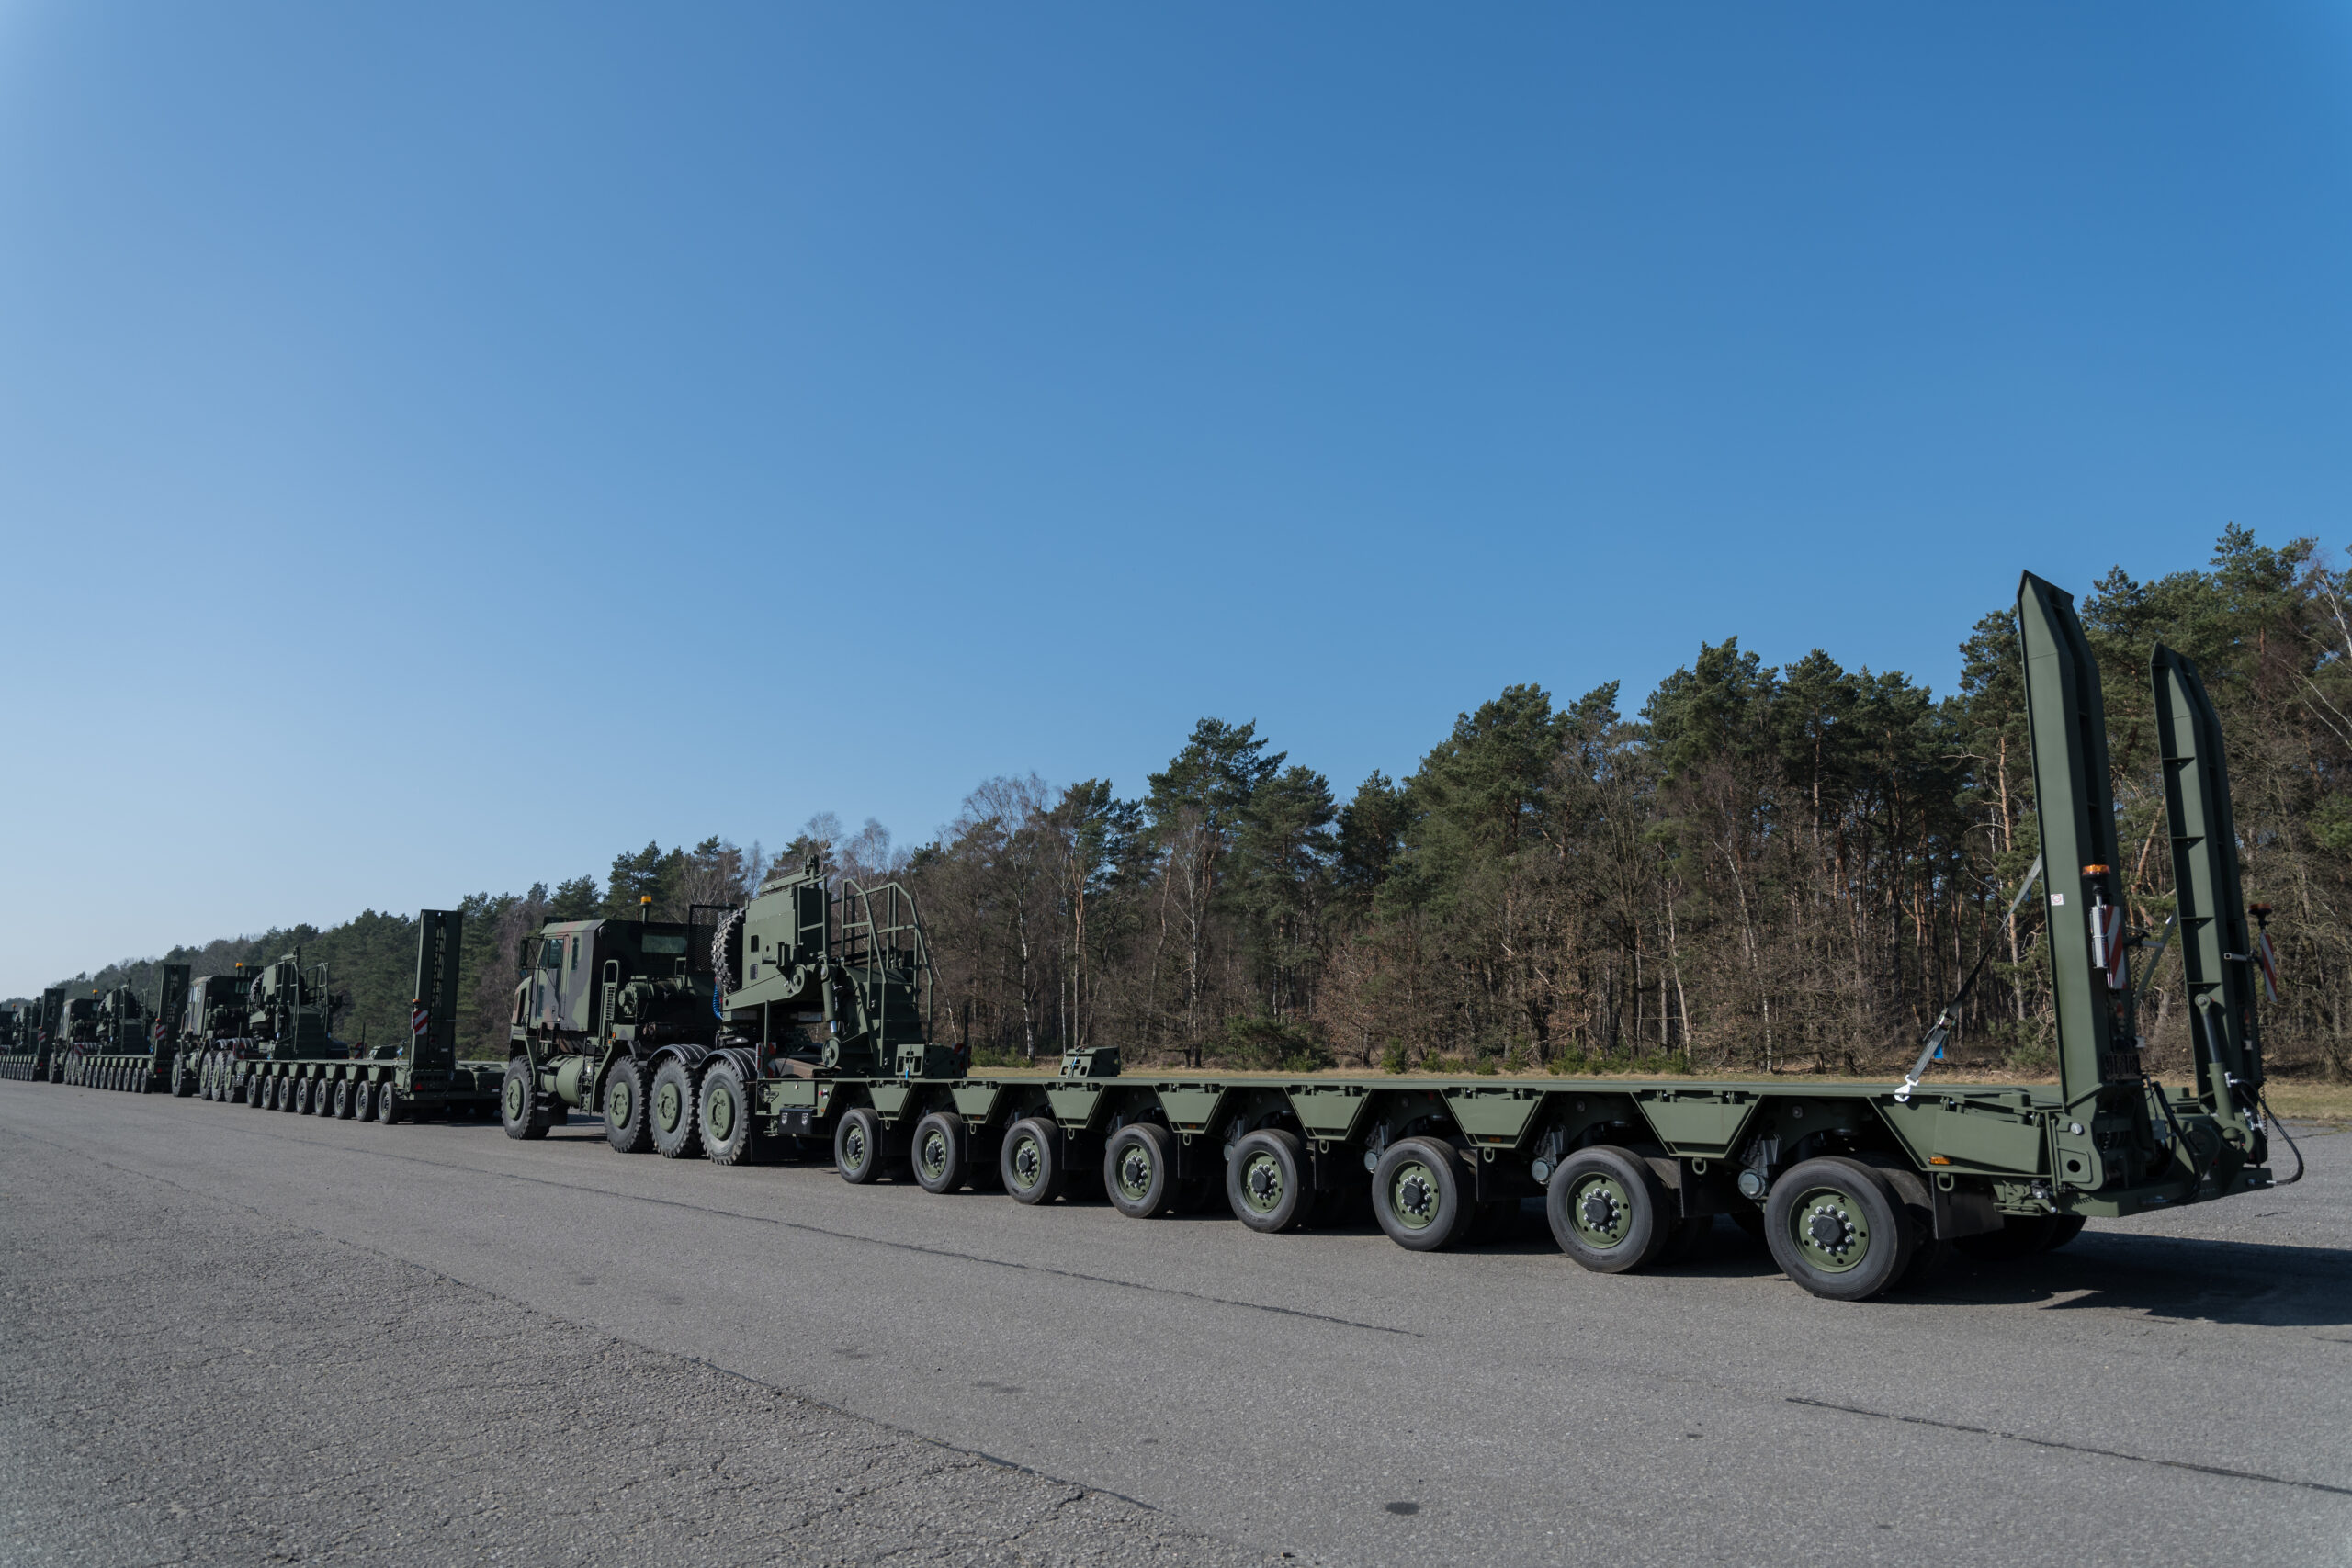 U.S. Army Enhanced Heavy Equipment Transporter Systems line up for a convoy, in a staging area of the Army Prepositioned Stock-2 site, in Zutendaal, Belgium, Mar. 09, 2022. Army Prepositioned Stocks is a U.S. Department of the Army program in which equipment sets are stored around the globe for use when a combatant commander requires additional capabilities. The U.S. Army has seven APS regions and APS-2 is designated for Europe. APS sites reduce deployment timelines, improve deterrence capabilities, and provide additional combat power for contingency operations. (U.S. Army photo by Pierre-Etienne Courtejoie)